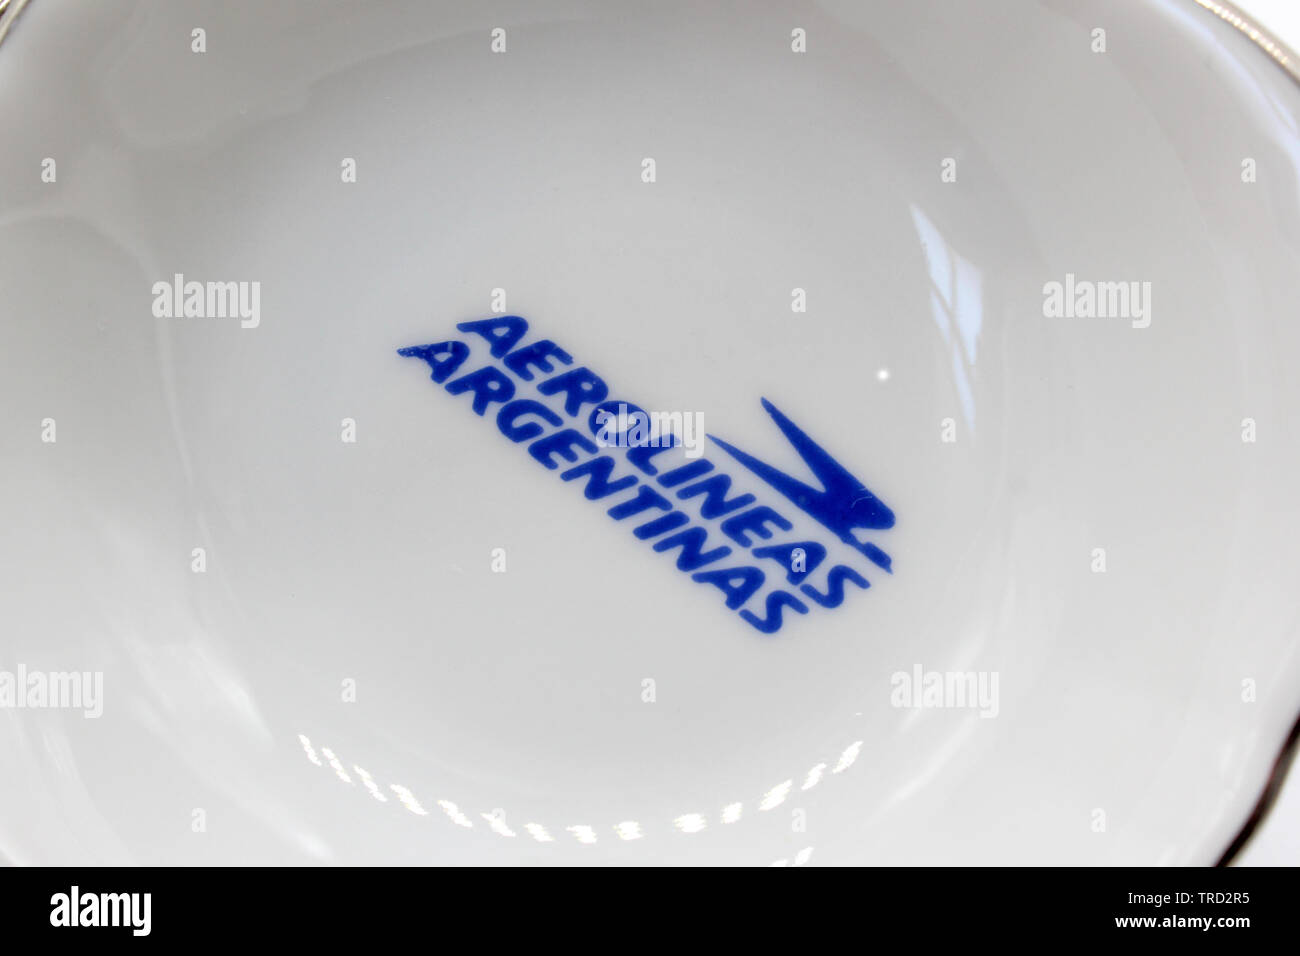 Aerolineas argentinas logo hi-res stock photography and images - Alamy